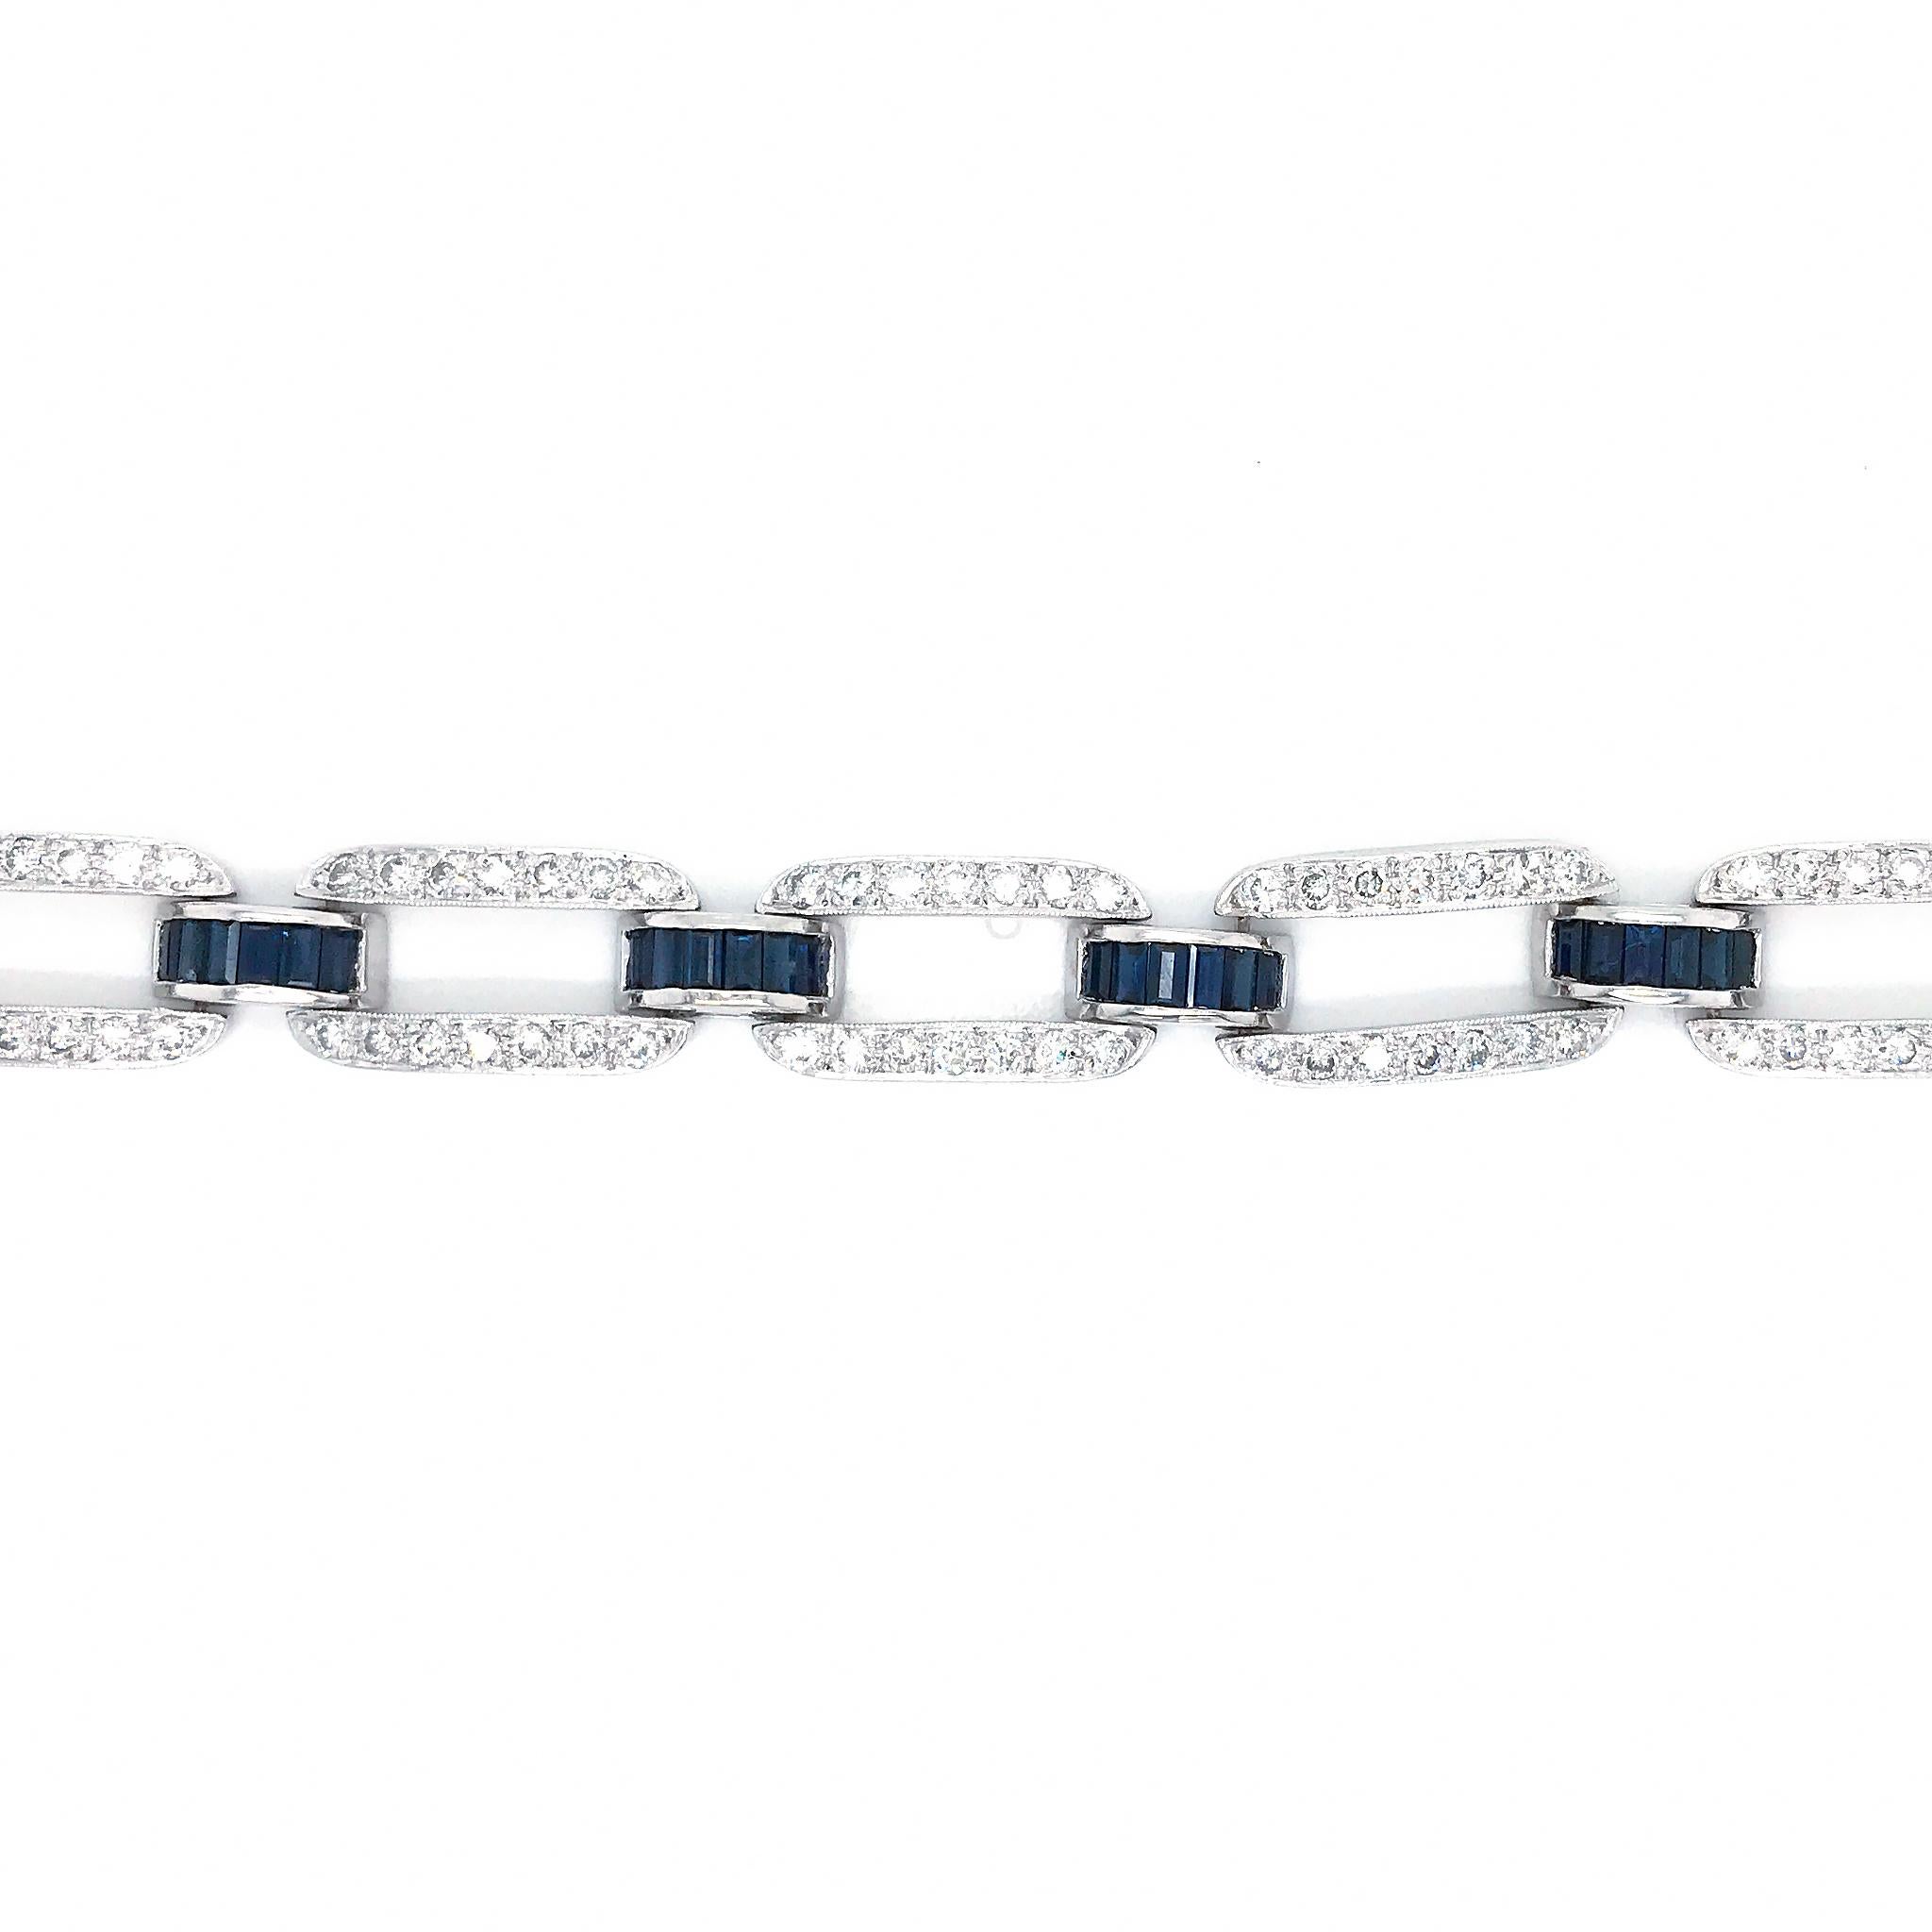 Platinum
Diamond = 4.0ct twd                                                                                           
Sapphire = 4.50ct twd
Total Weight: 51 grams
Bracelet Lenght: 7 inches